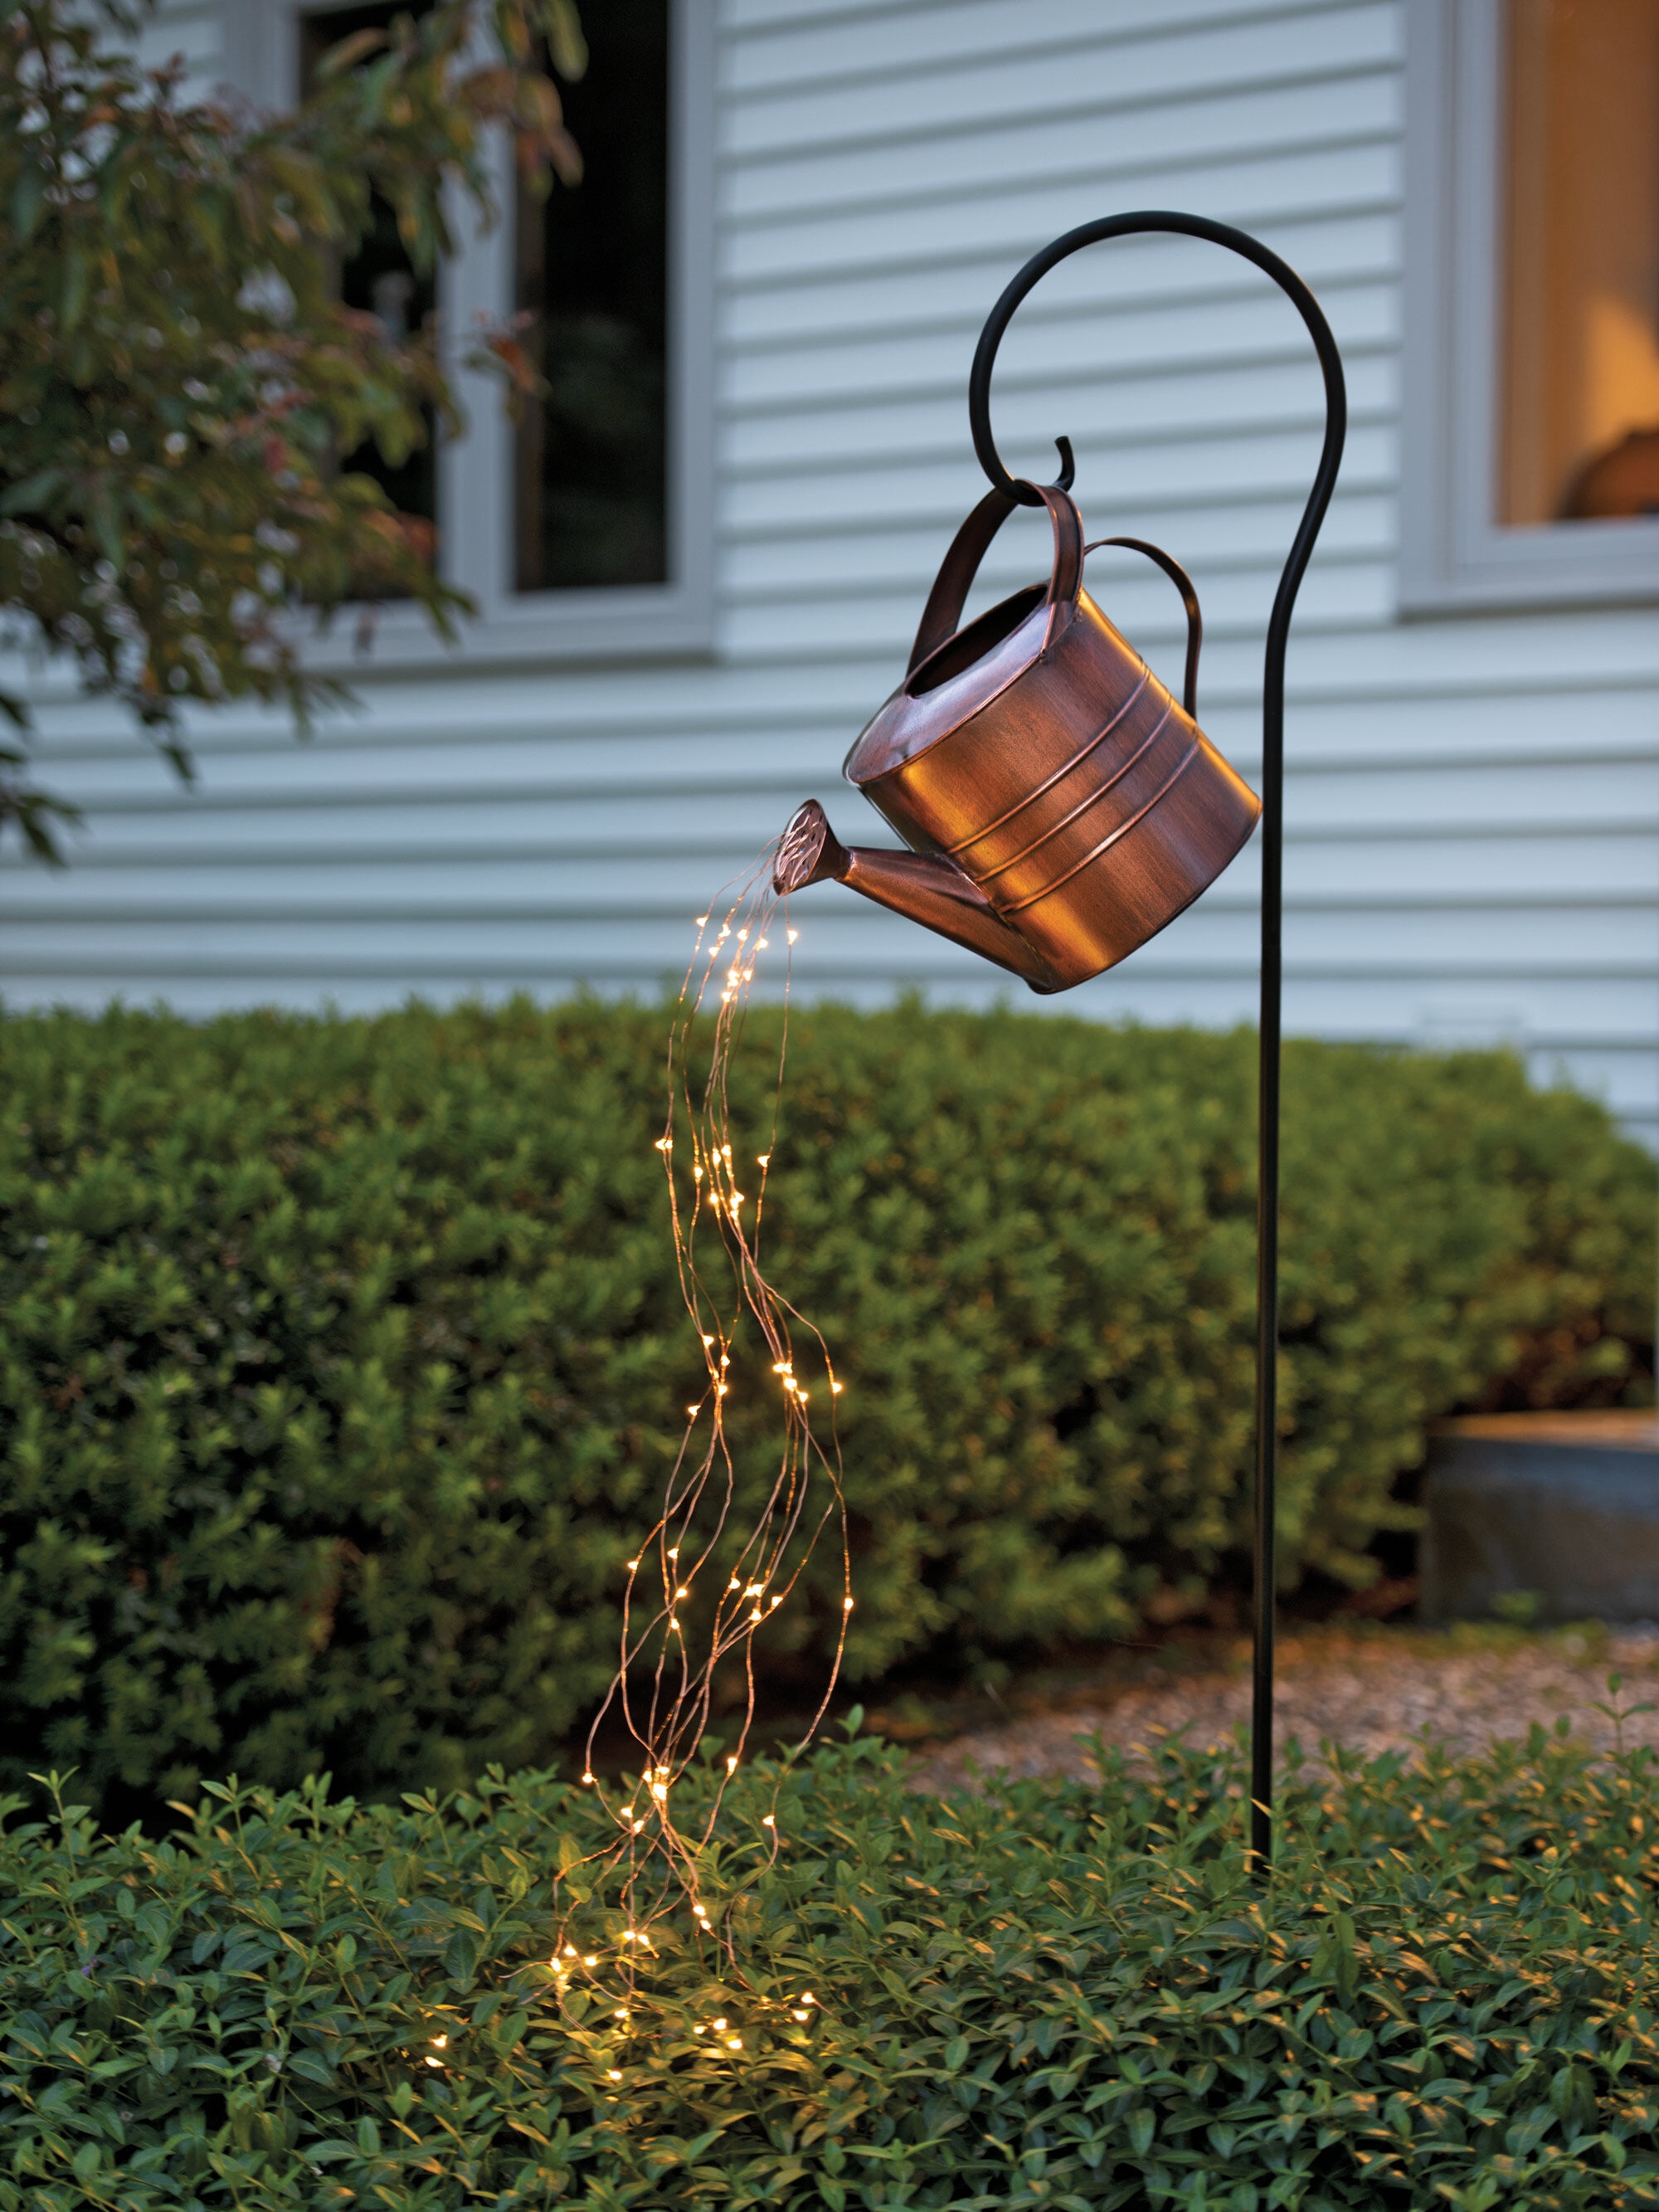 Star Shower Watering Can Decor with Lights | Gardeners.com